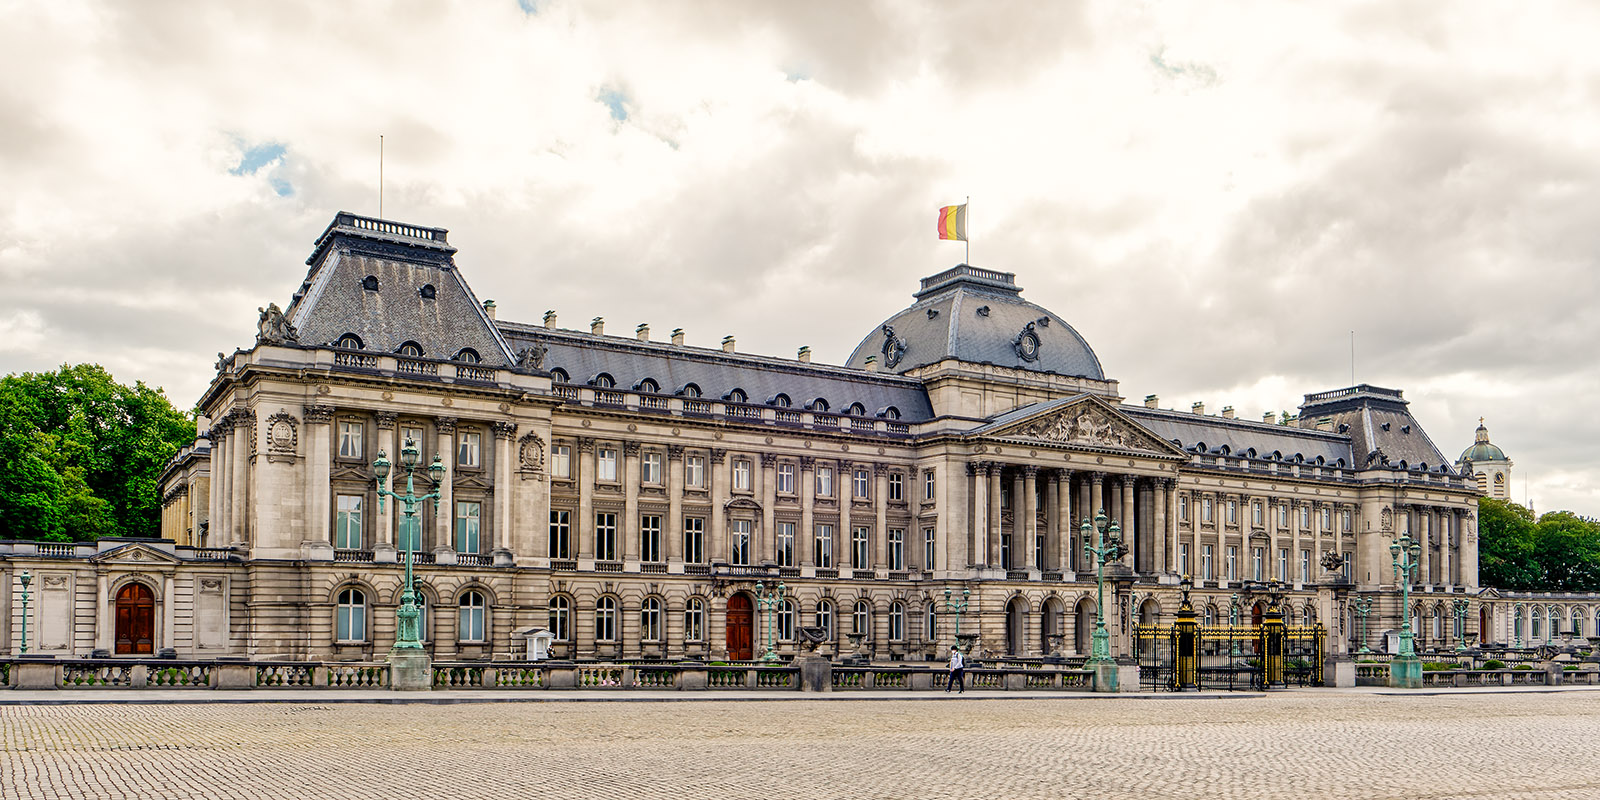 The Royal Palace of Brussels, the official palace of the King and Queen of the Belgians